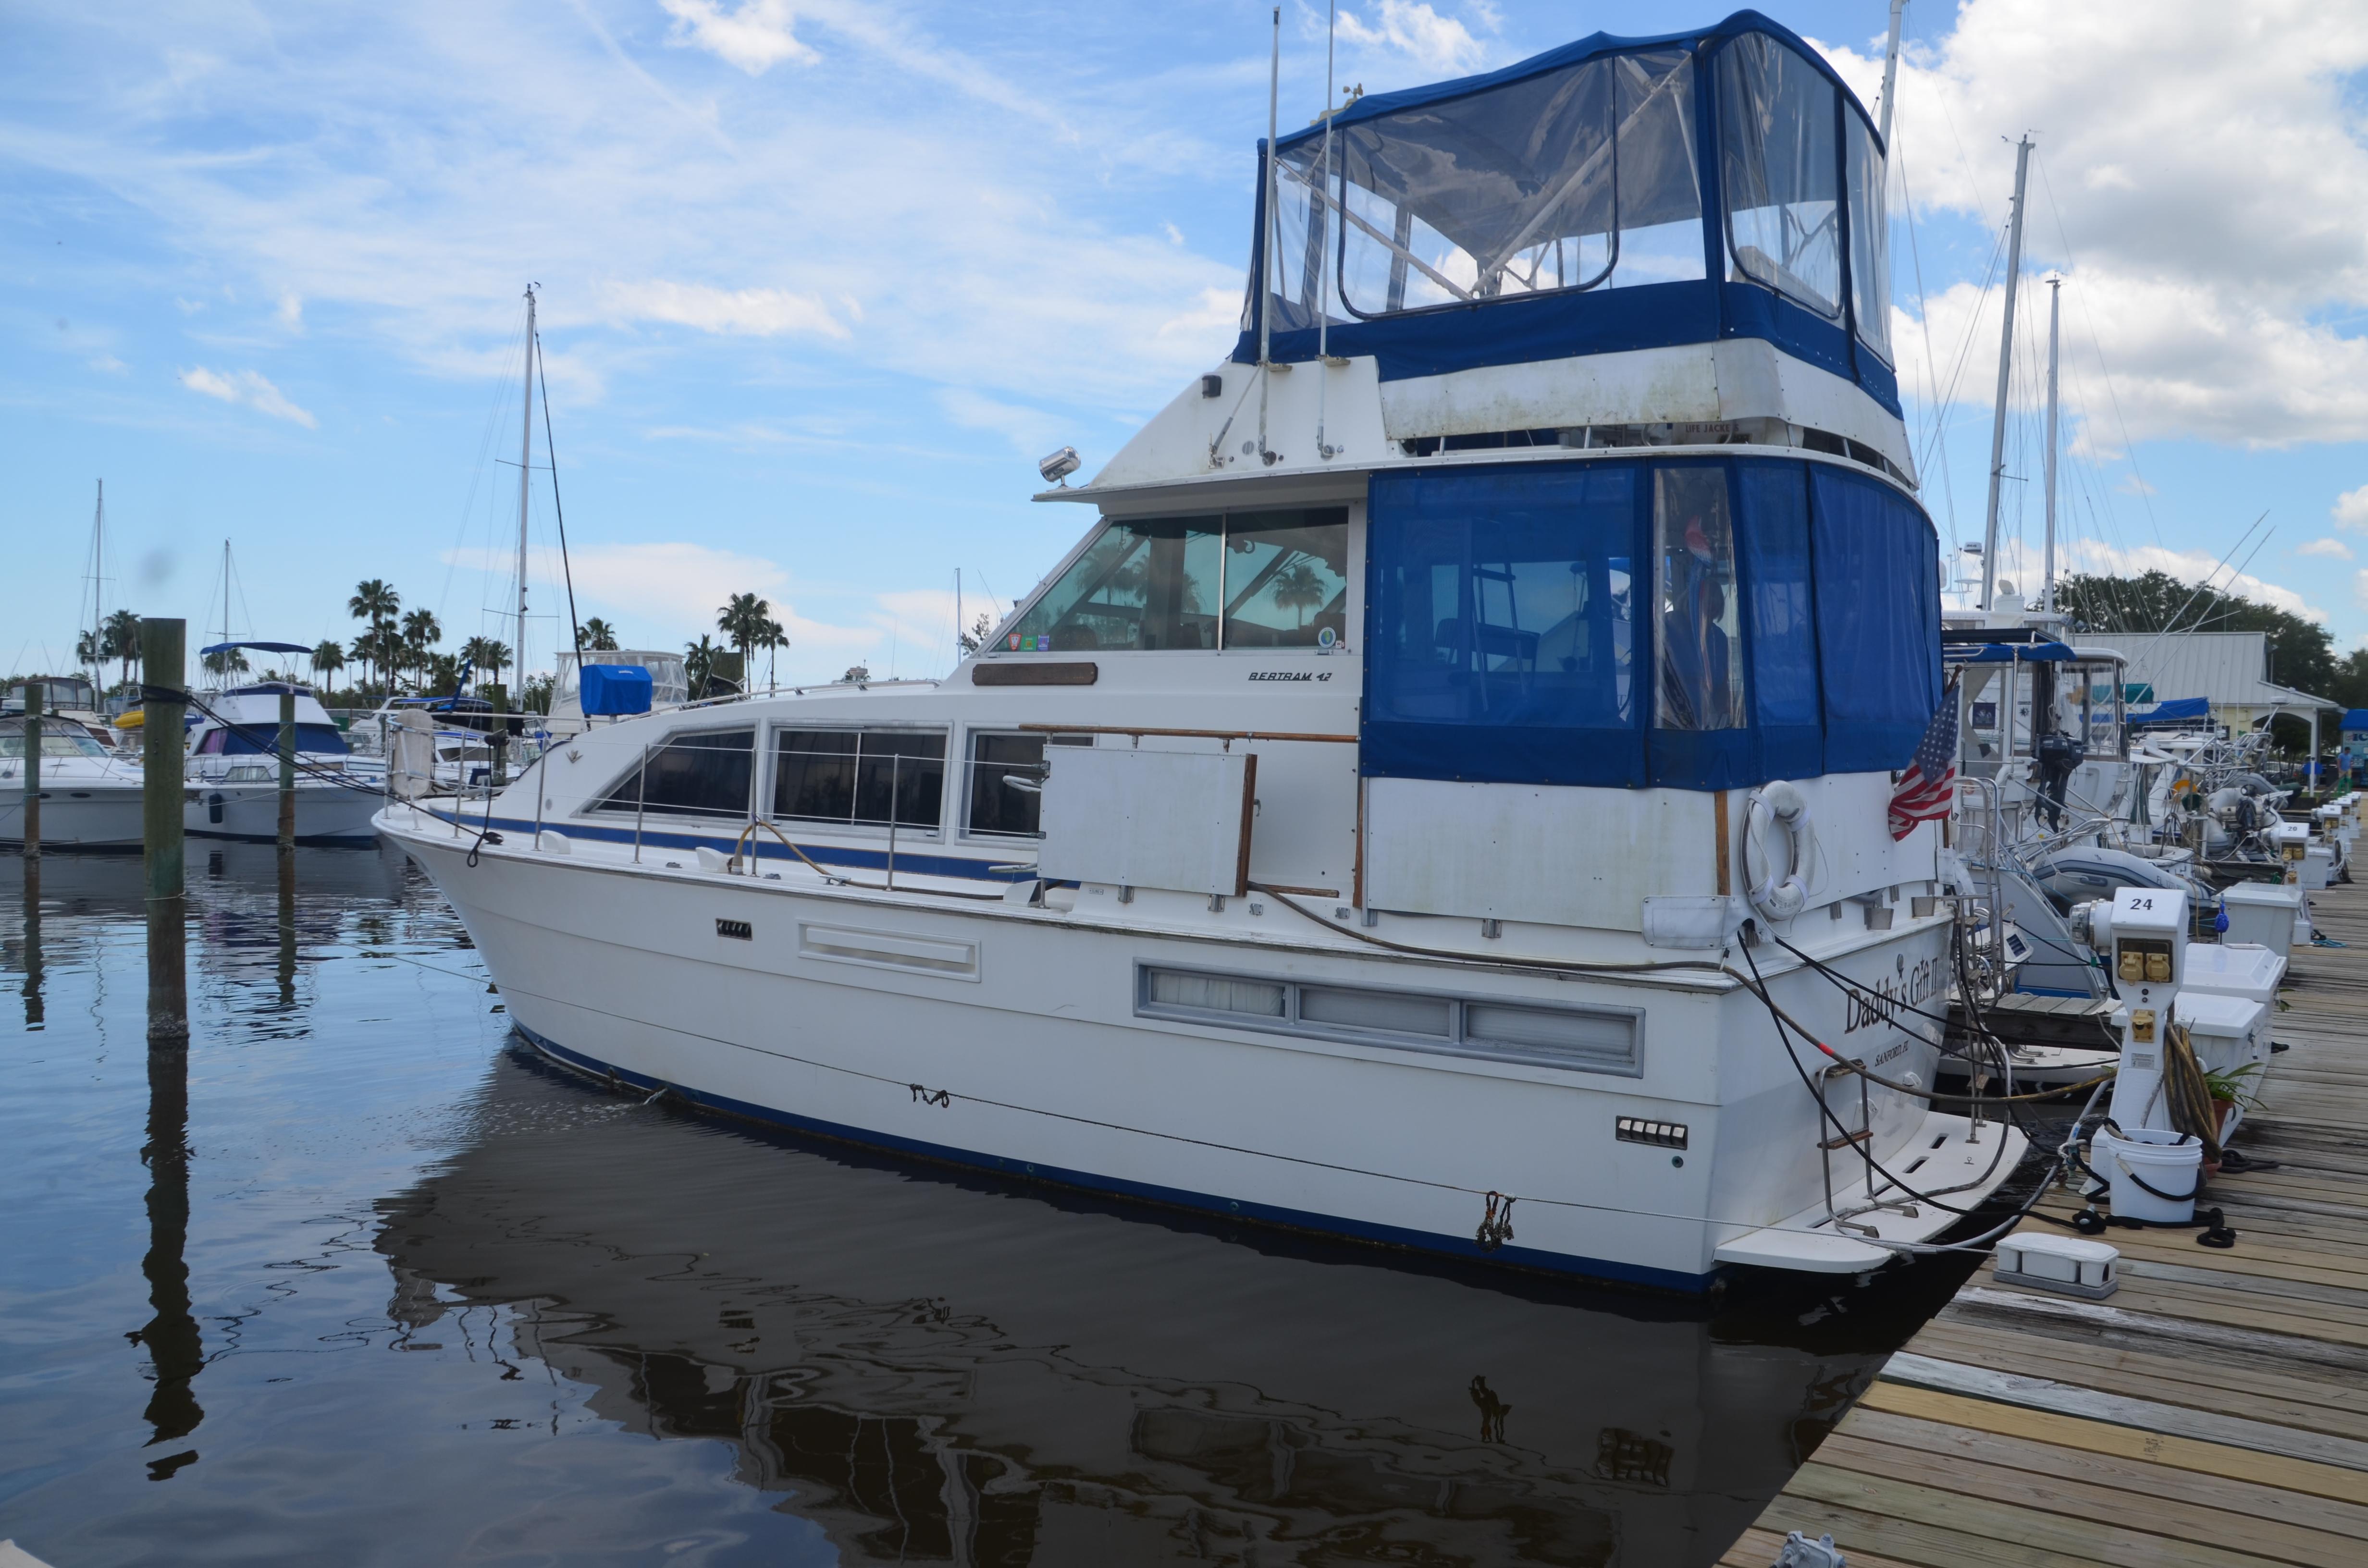 42 ft motor yachts for sale